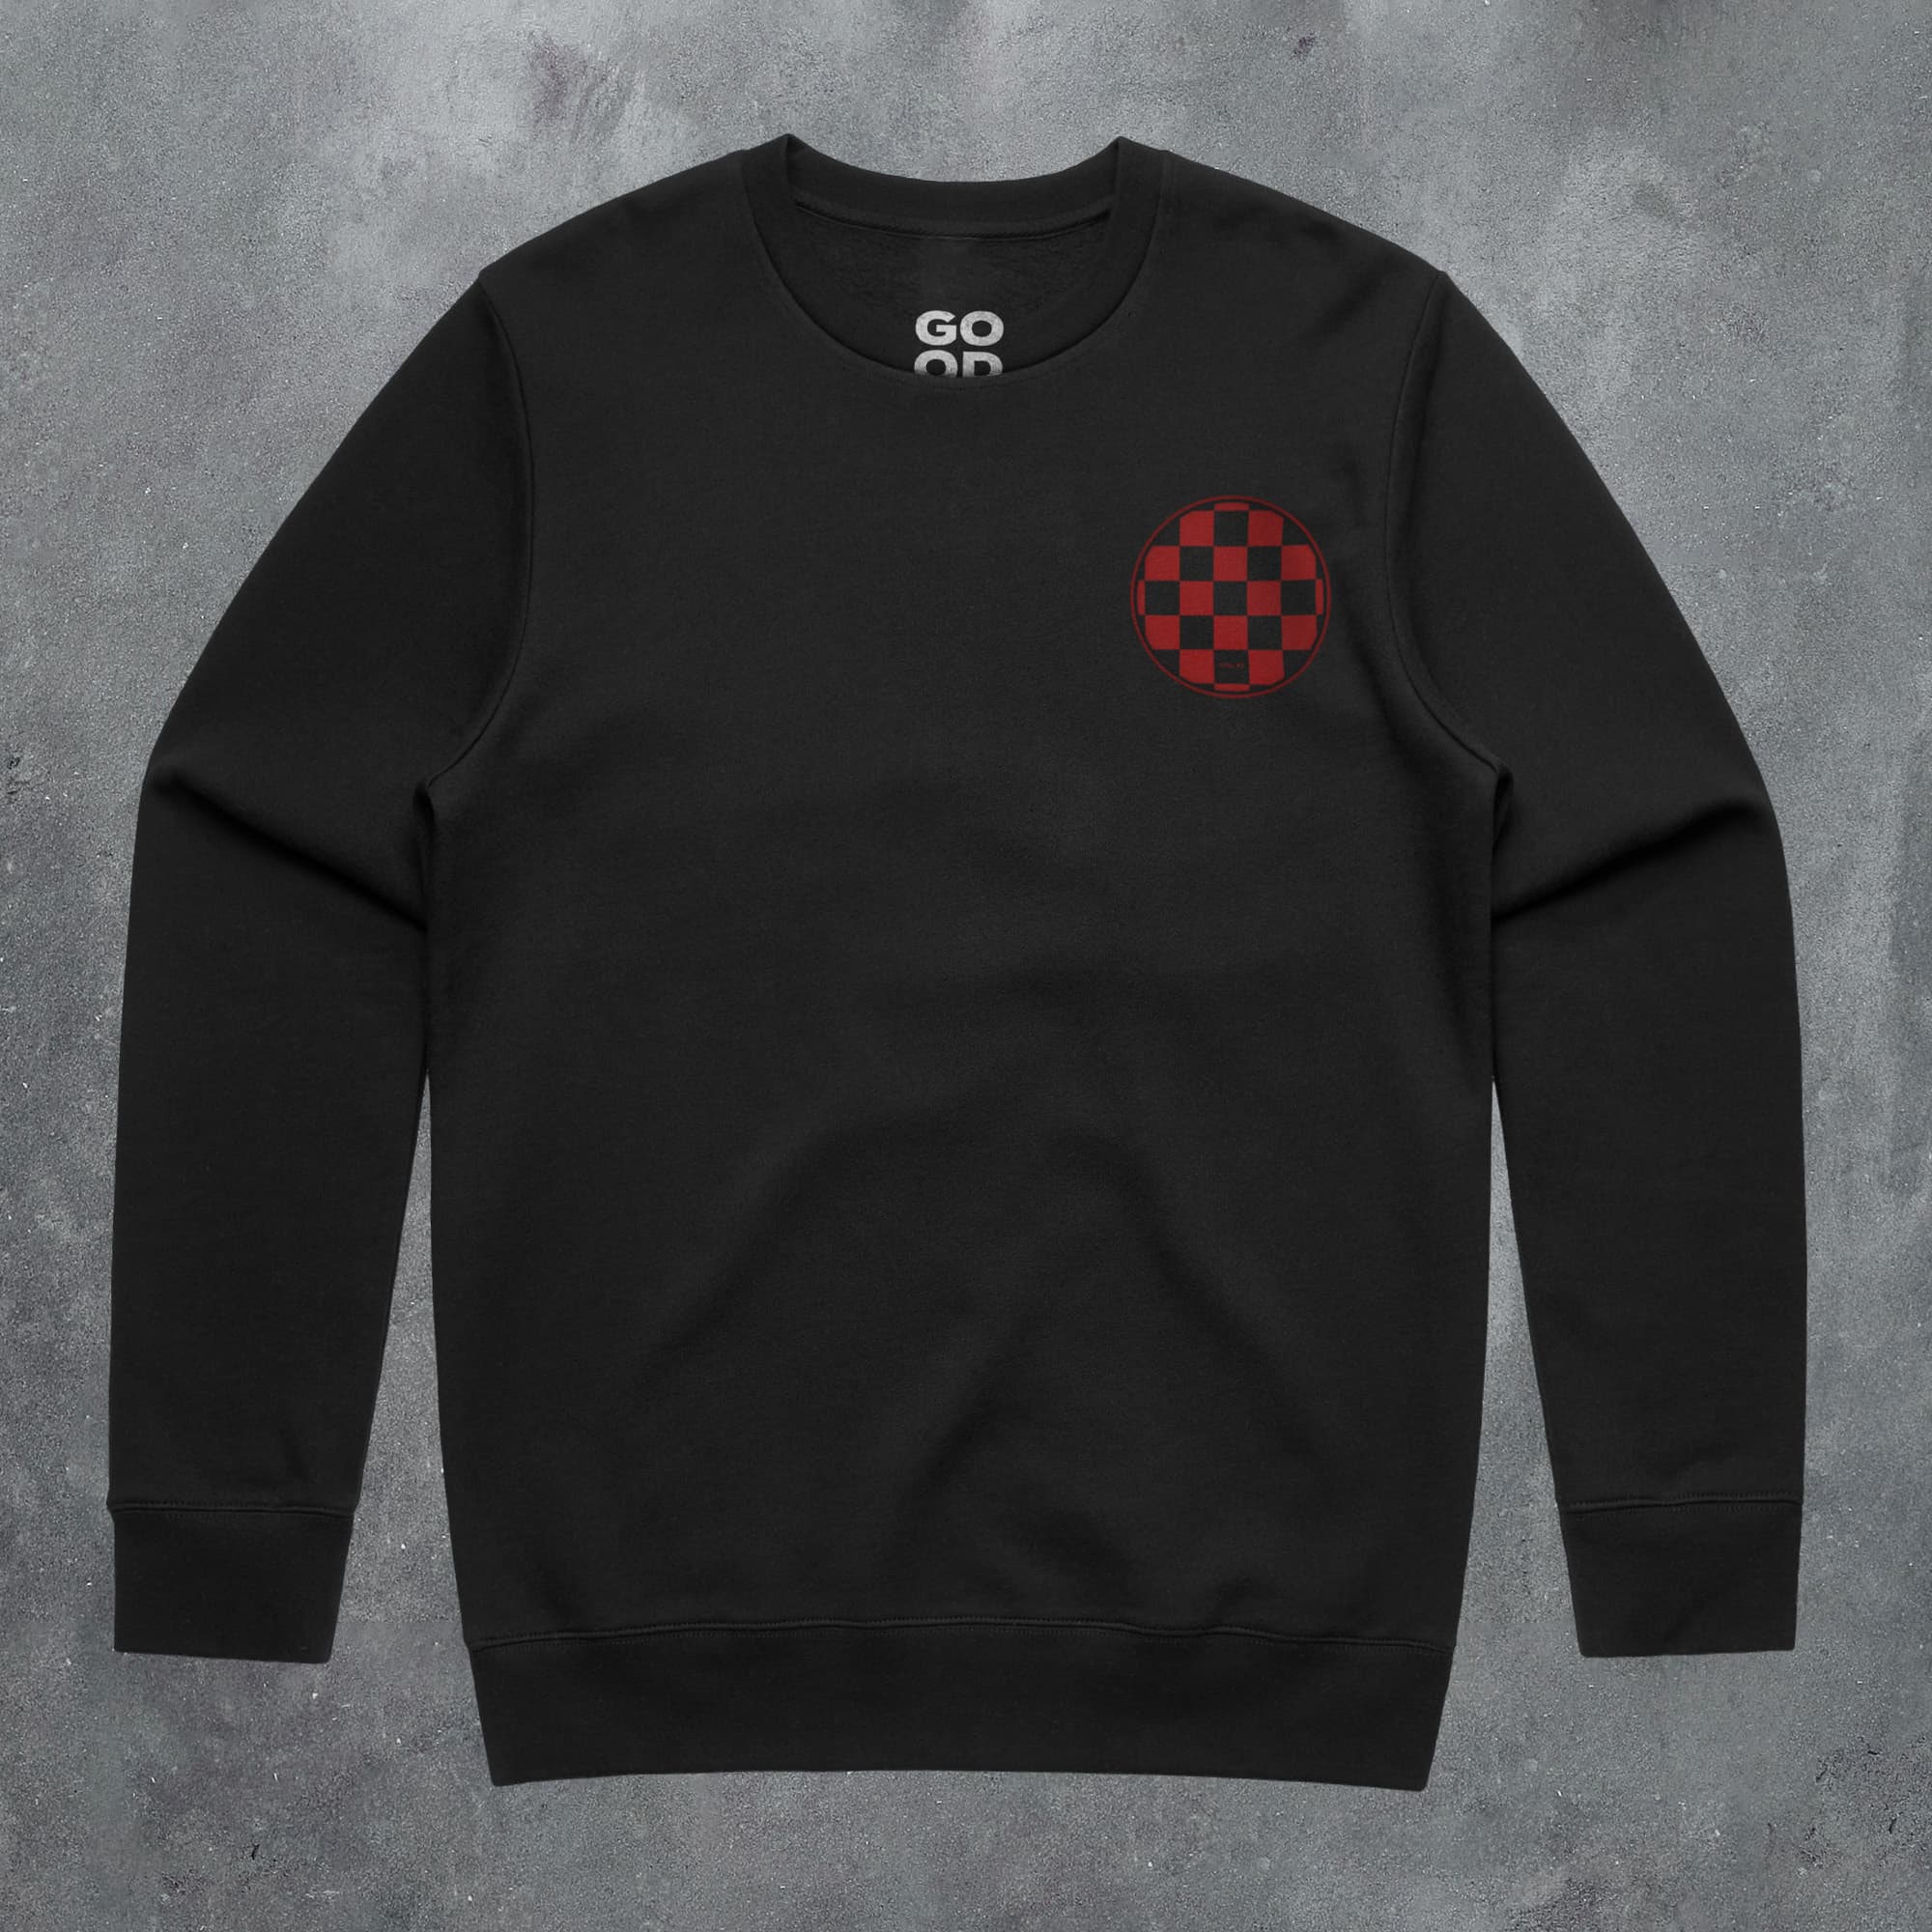 a black sweatshirt with a red checkered design on it